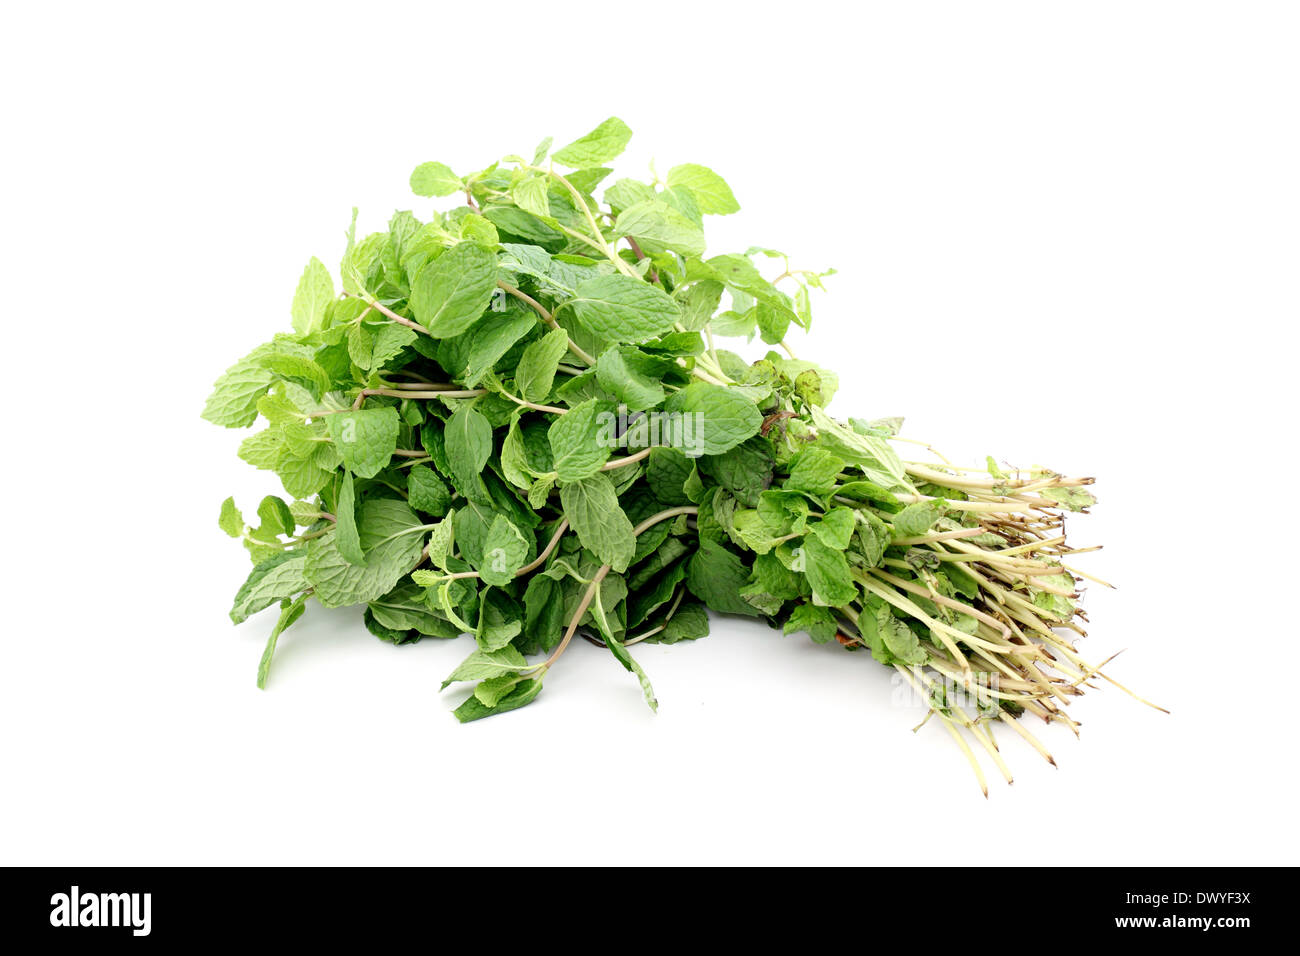 Bunch of mint leaves close up on a white background Stock Photo